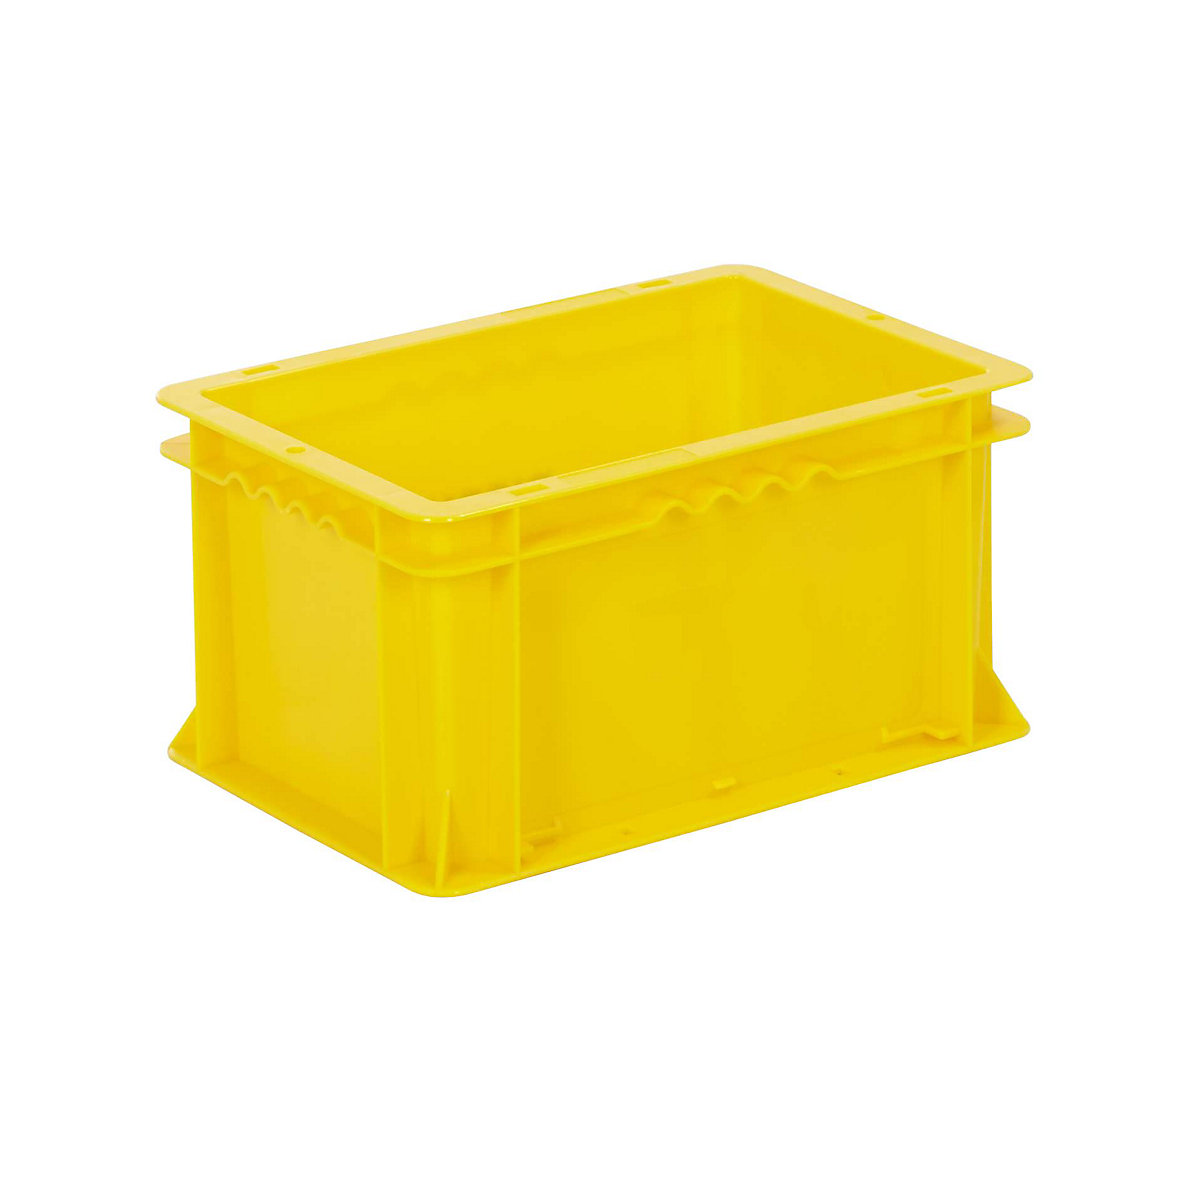 Euro stacking container, capacity 6 litre, yellow-7